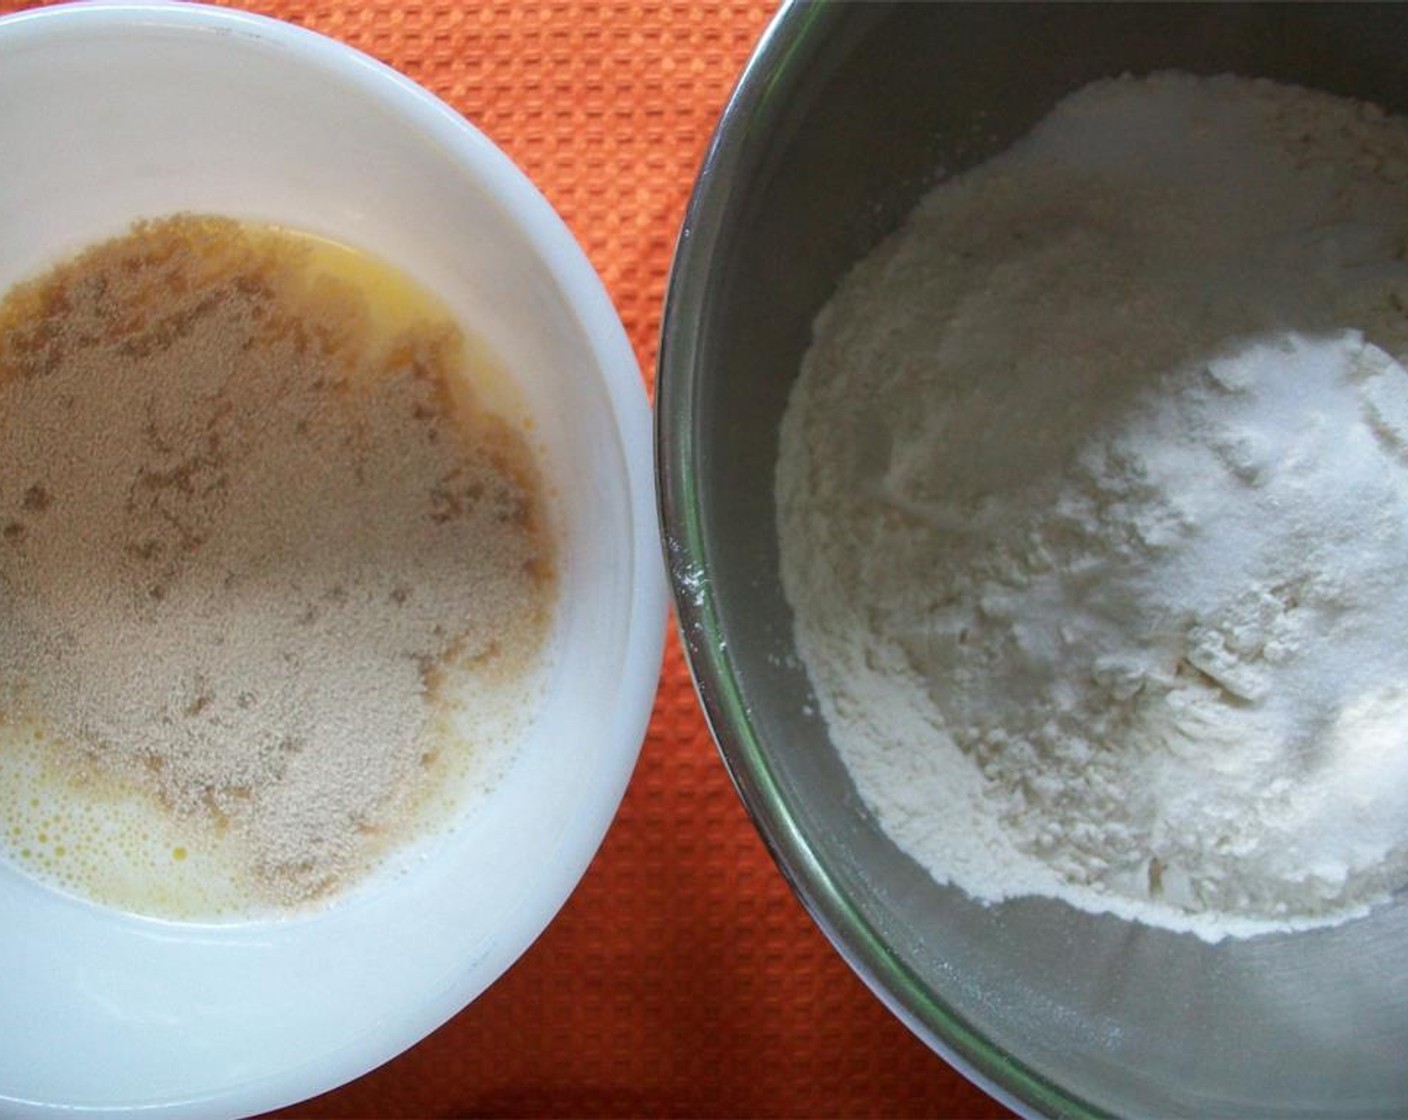 step 1 Combine Milk (1 cup), Water (1/3 cup), Butter (2 Tbsp), Granulated Sugar (1/4 cup) and Active Dry Yeast (1/2 Tbsp). In another bowl, combine All-Purpose Flour (3 1/4 cups) and Salt (1/2 Tbsp).